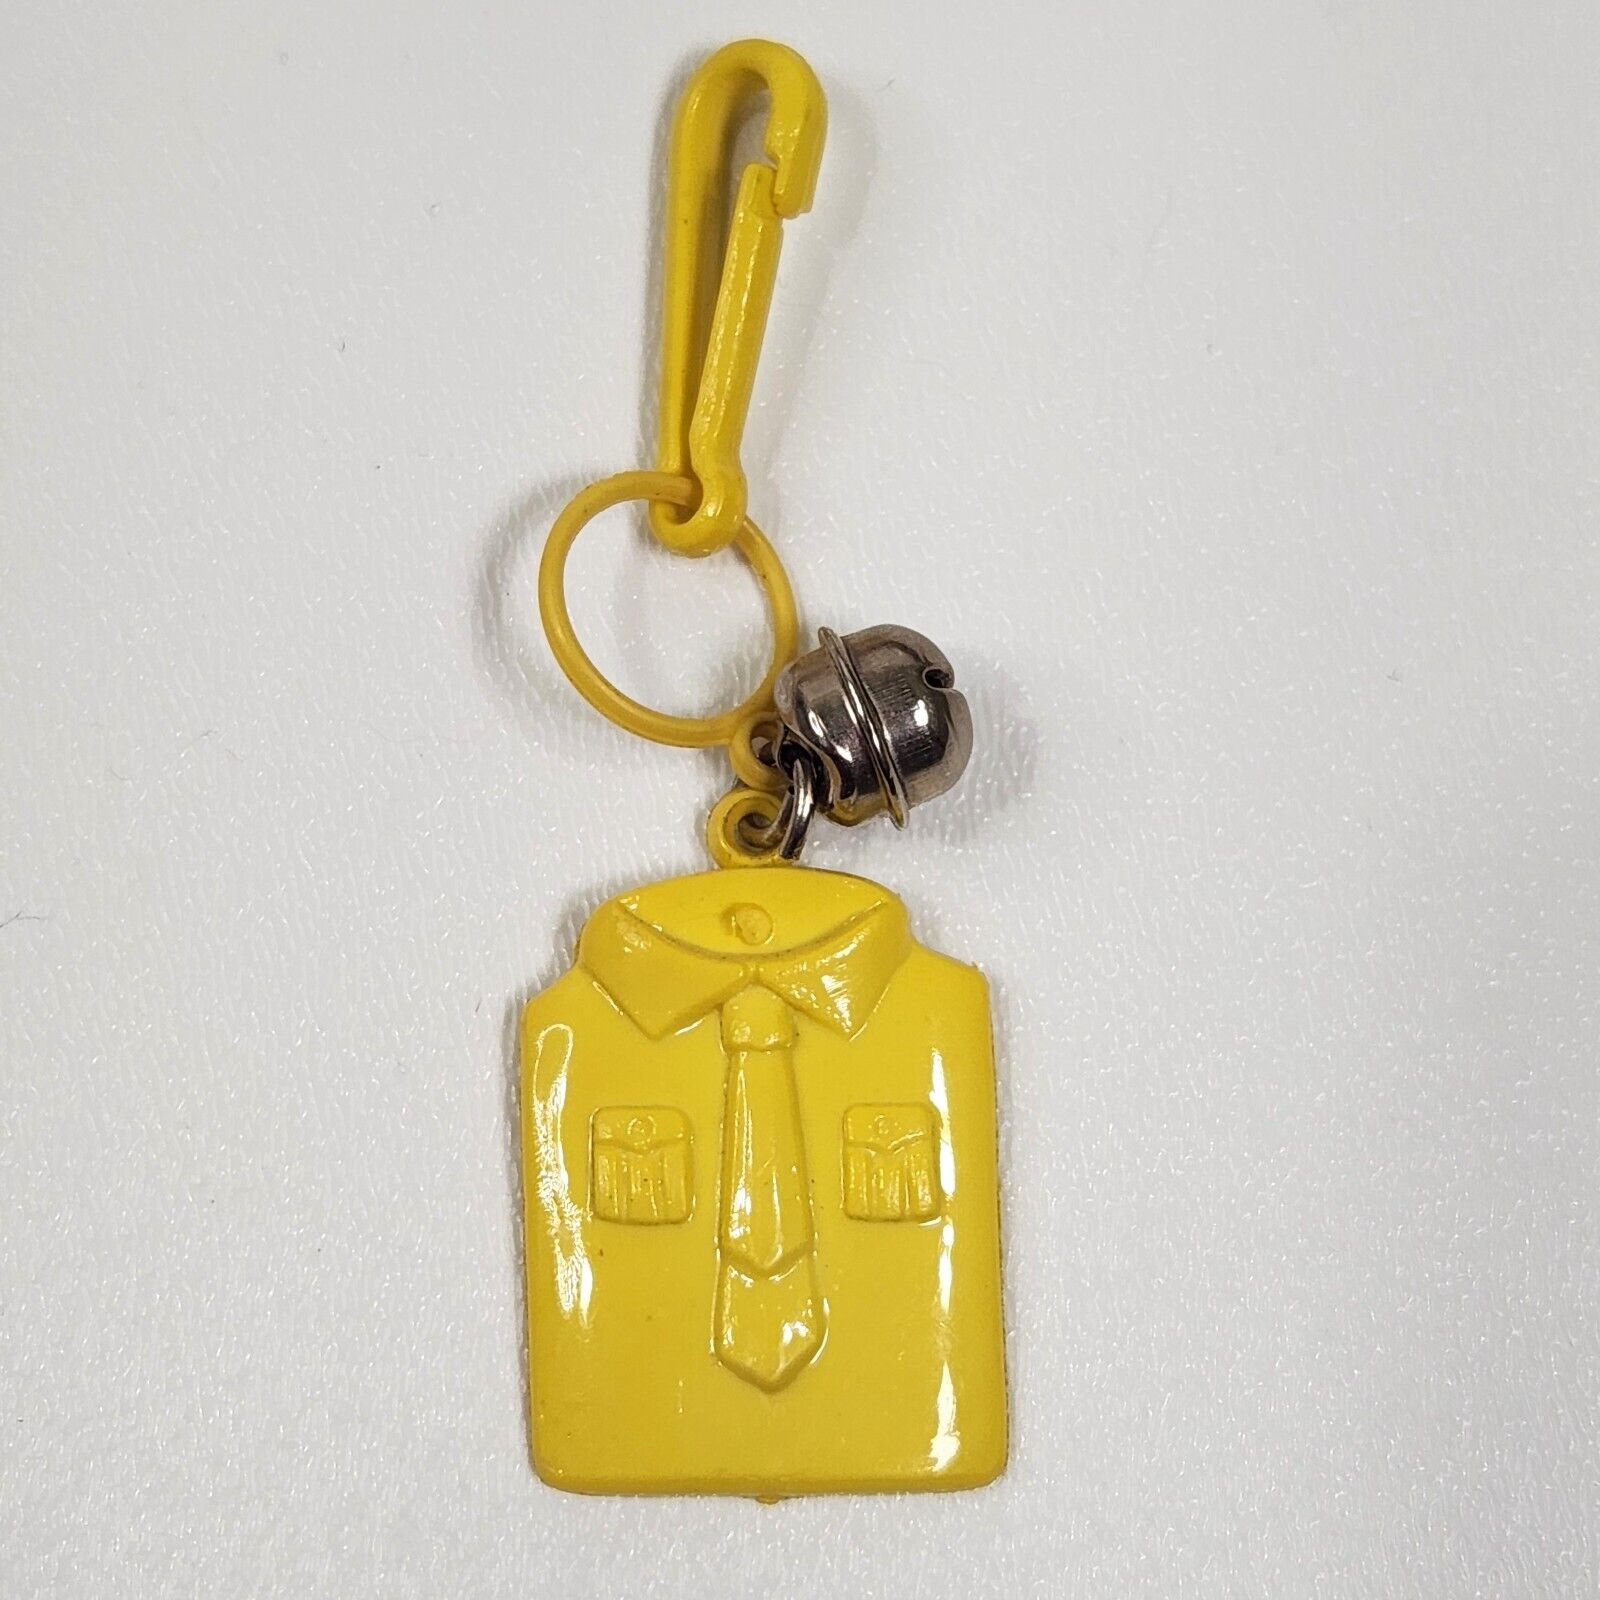 Vintage 1980s Plastic Bell Charm Shirt For 80s Necklace